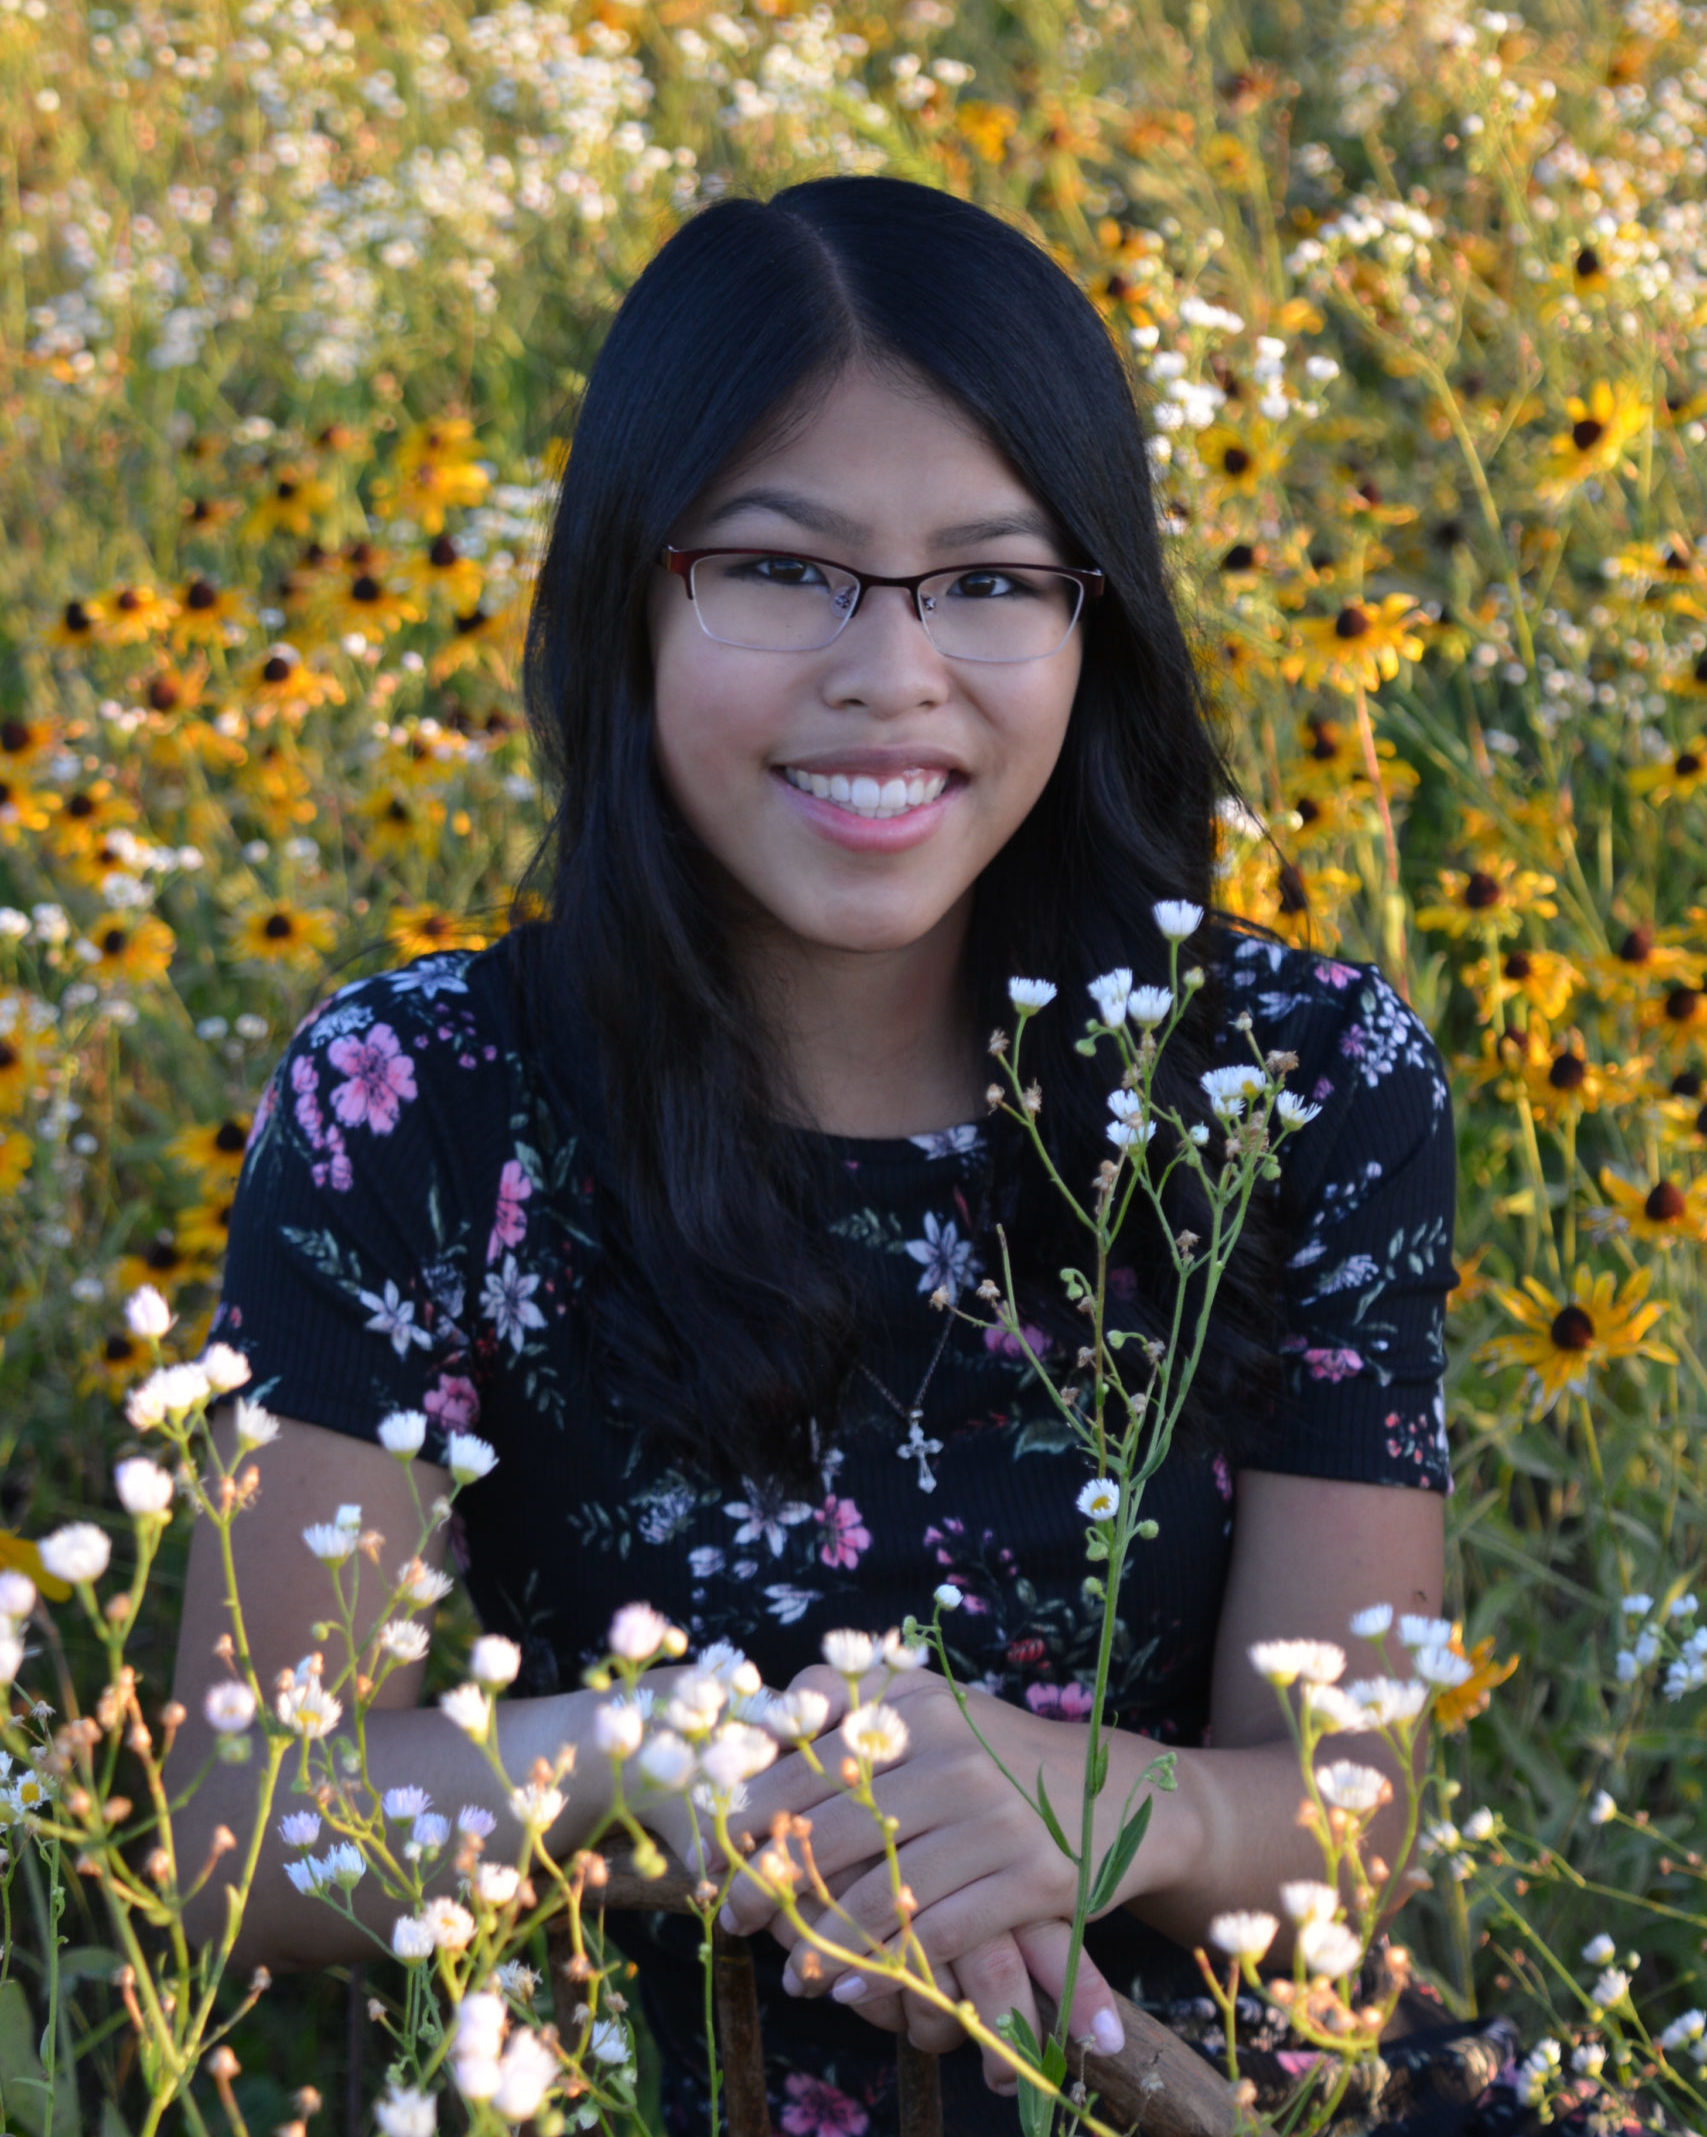 smiling girl sitting in field of flowers wearing floral dress and glasses